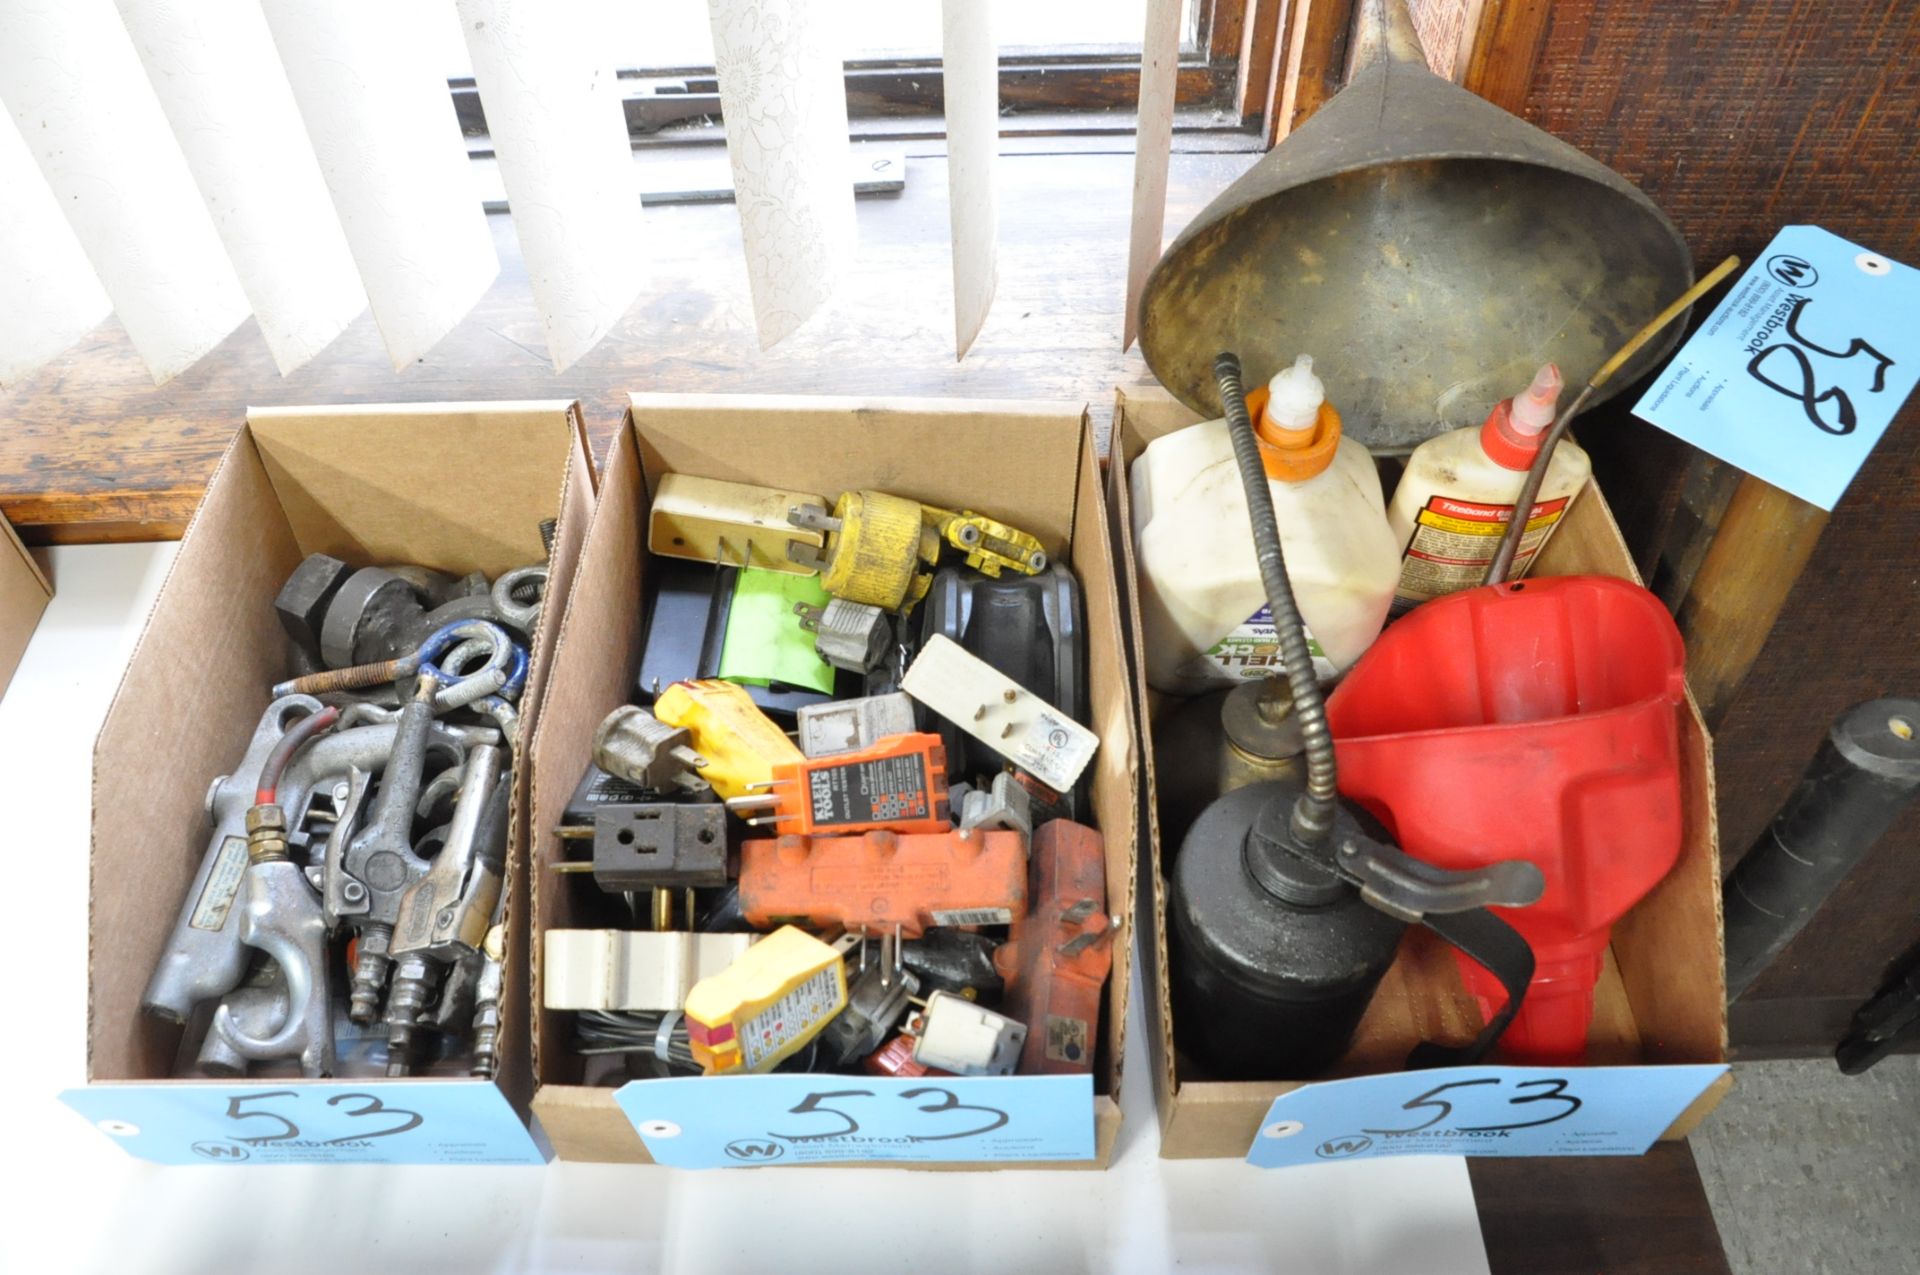 Lot-Blow Off Tools, Plugs, Torch Sparkers, Power Tool Handles, Bungees, Etc. (6) Boxes - Image 2 of 3